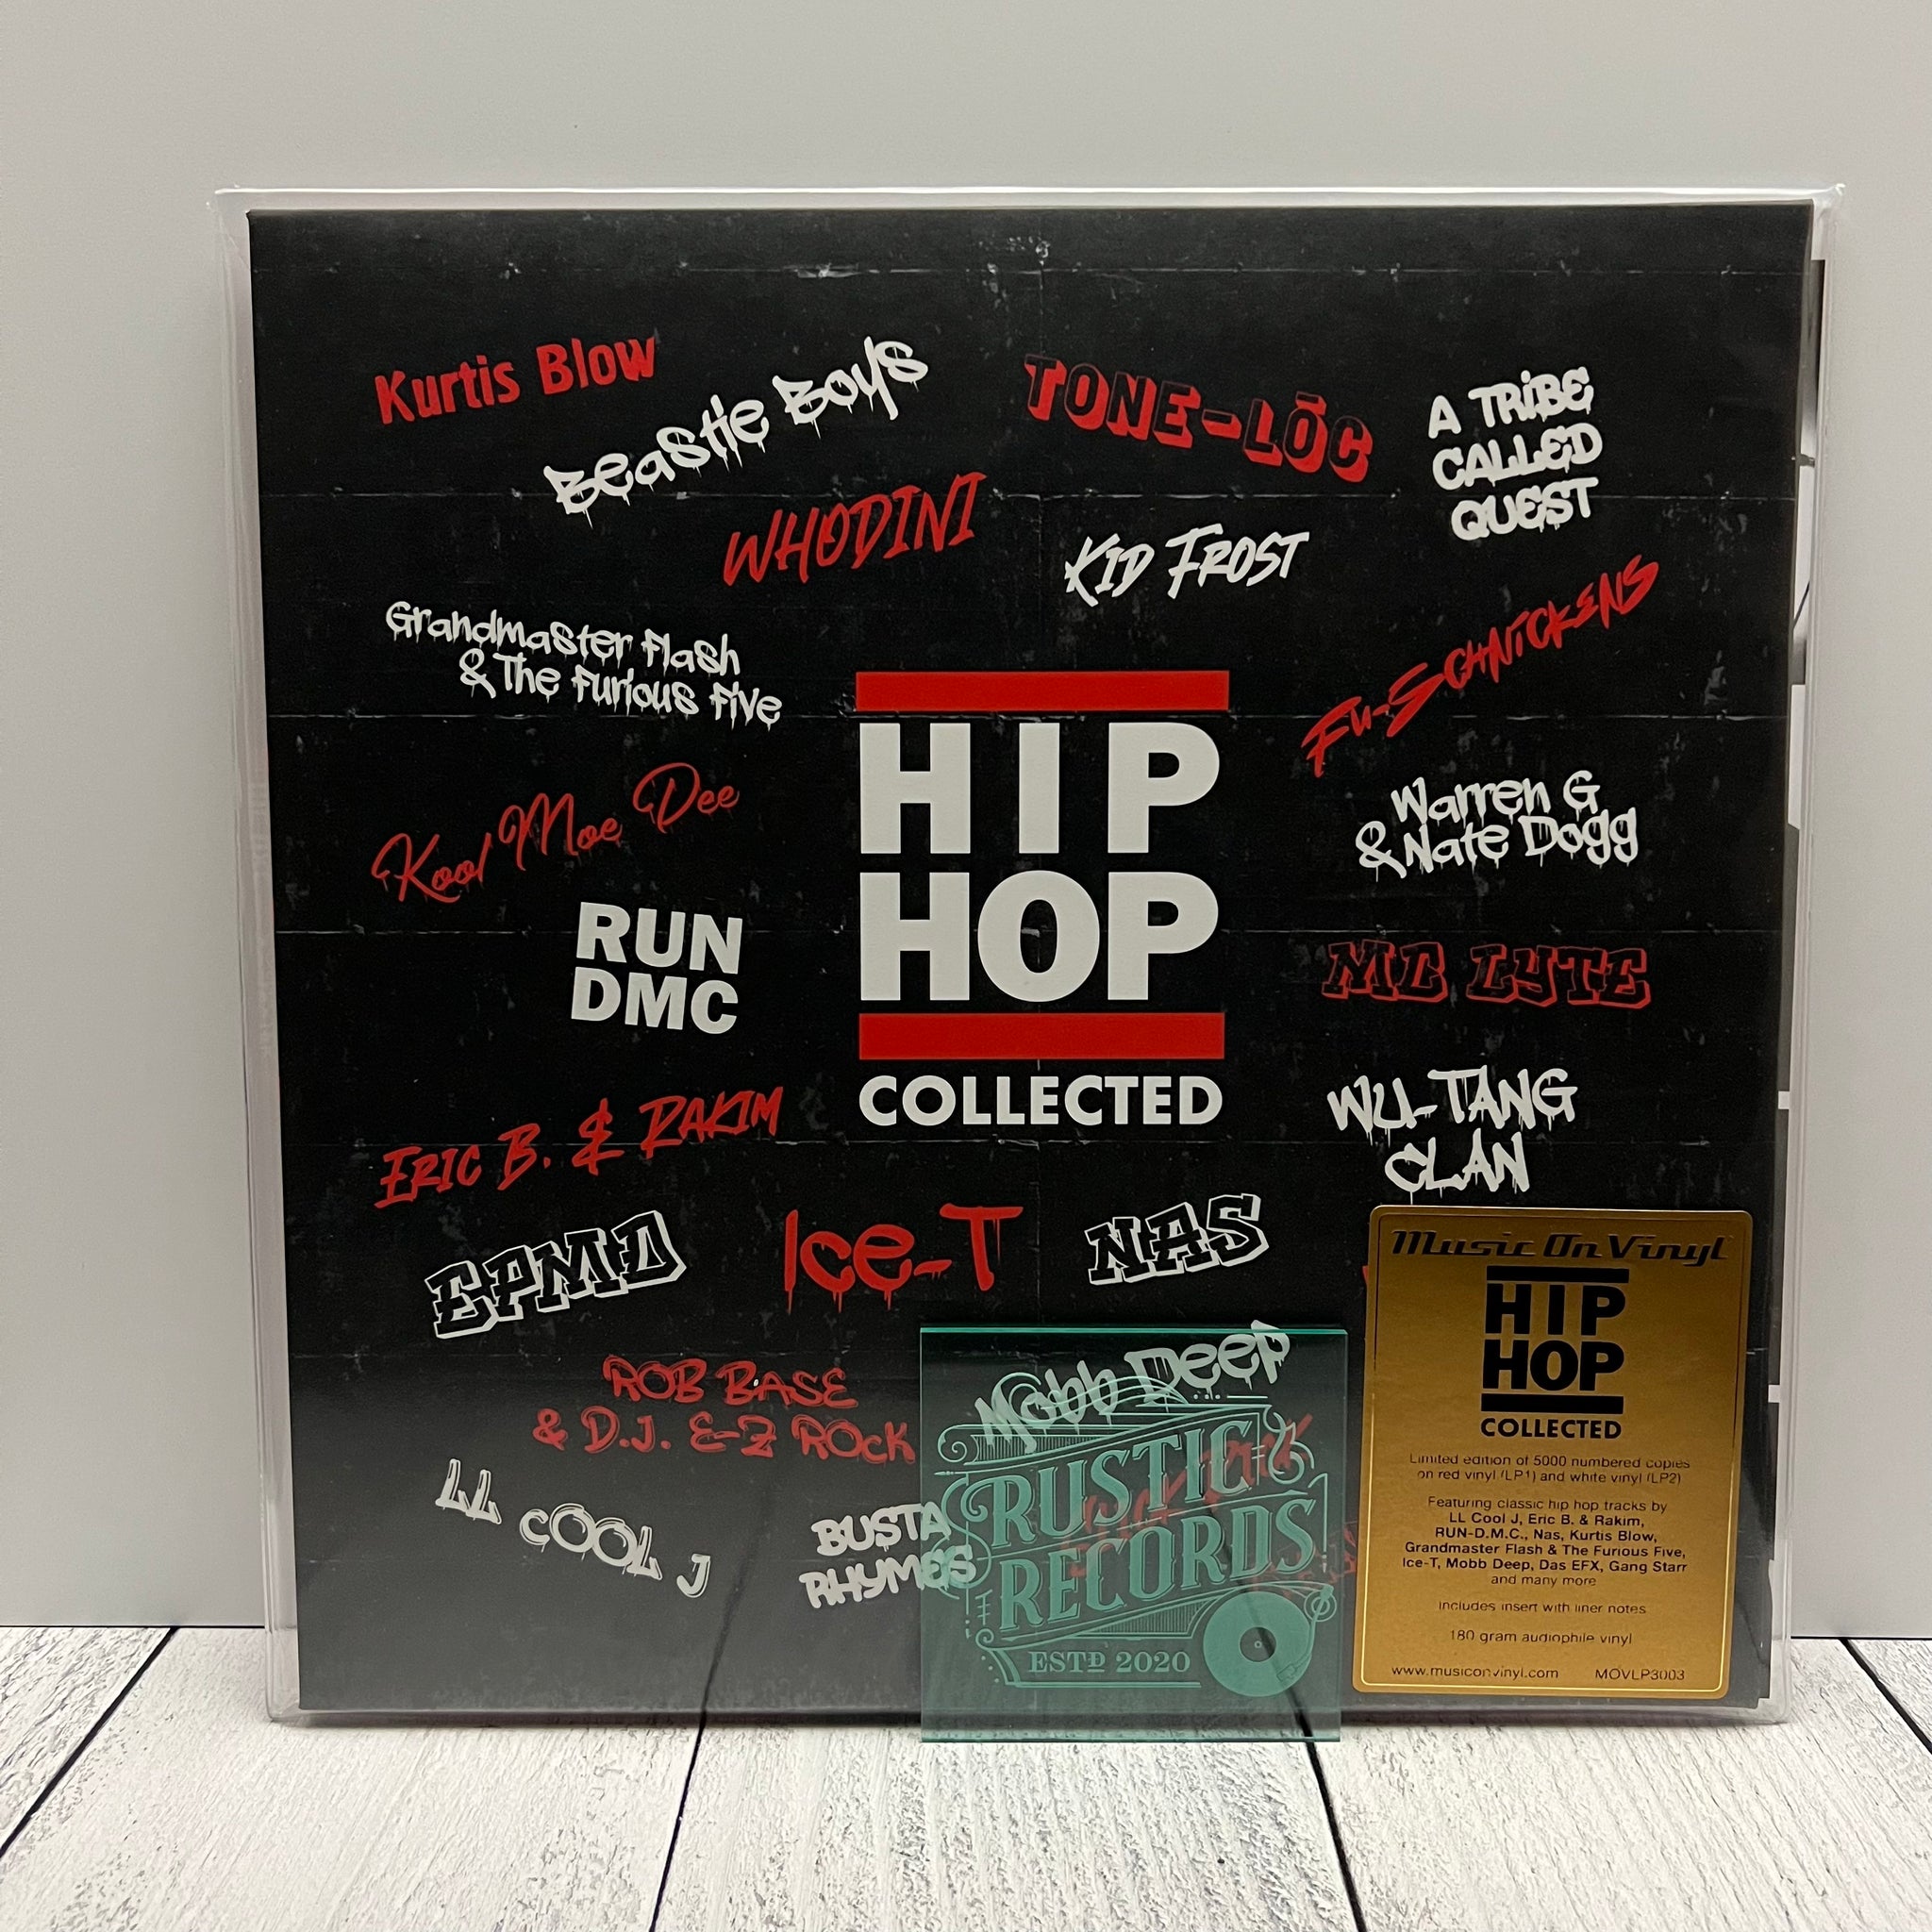 Hip Hop Collected (Music On Vinyl/Numbered)